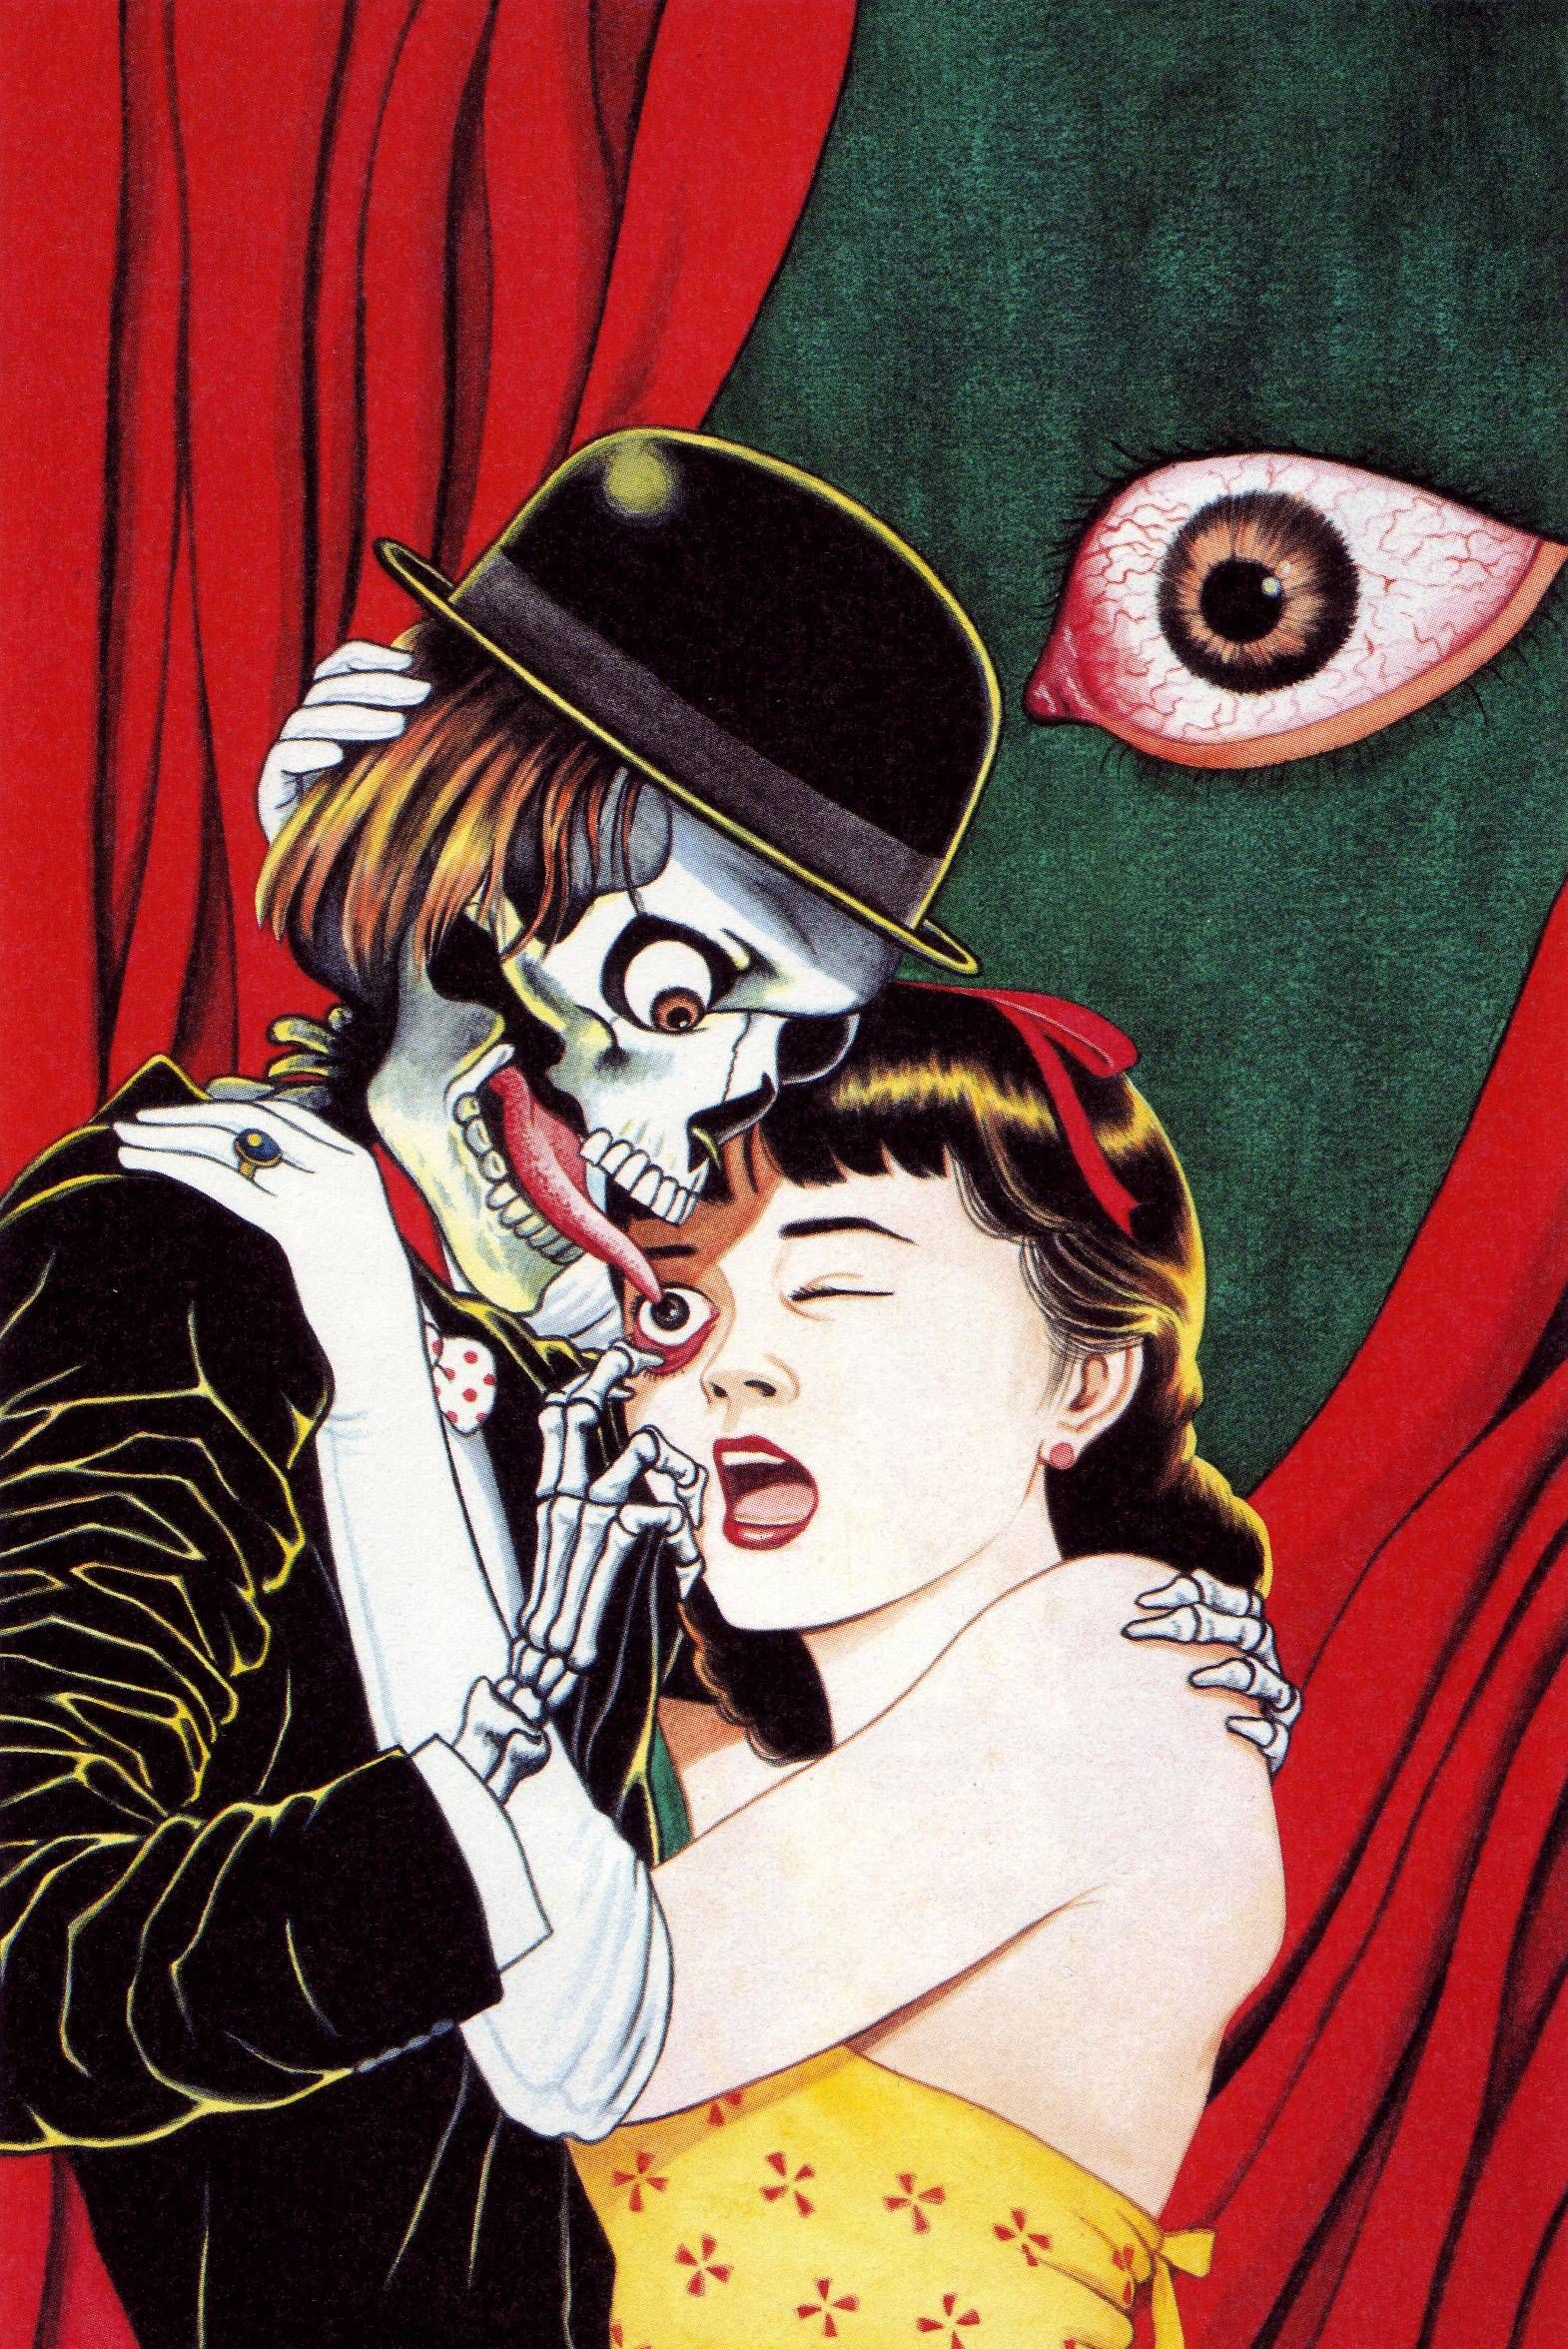 Skeleton wearing a bowler hat licking the eye-ball of an innocent girl by Suehiro Maruo